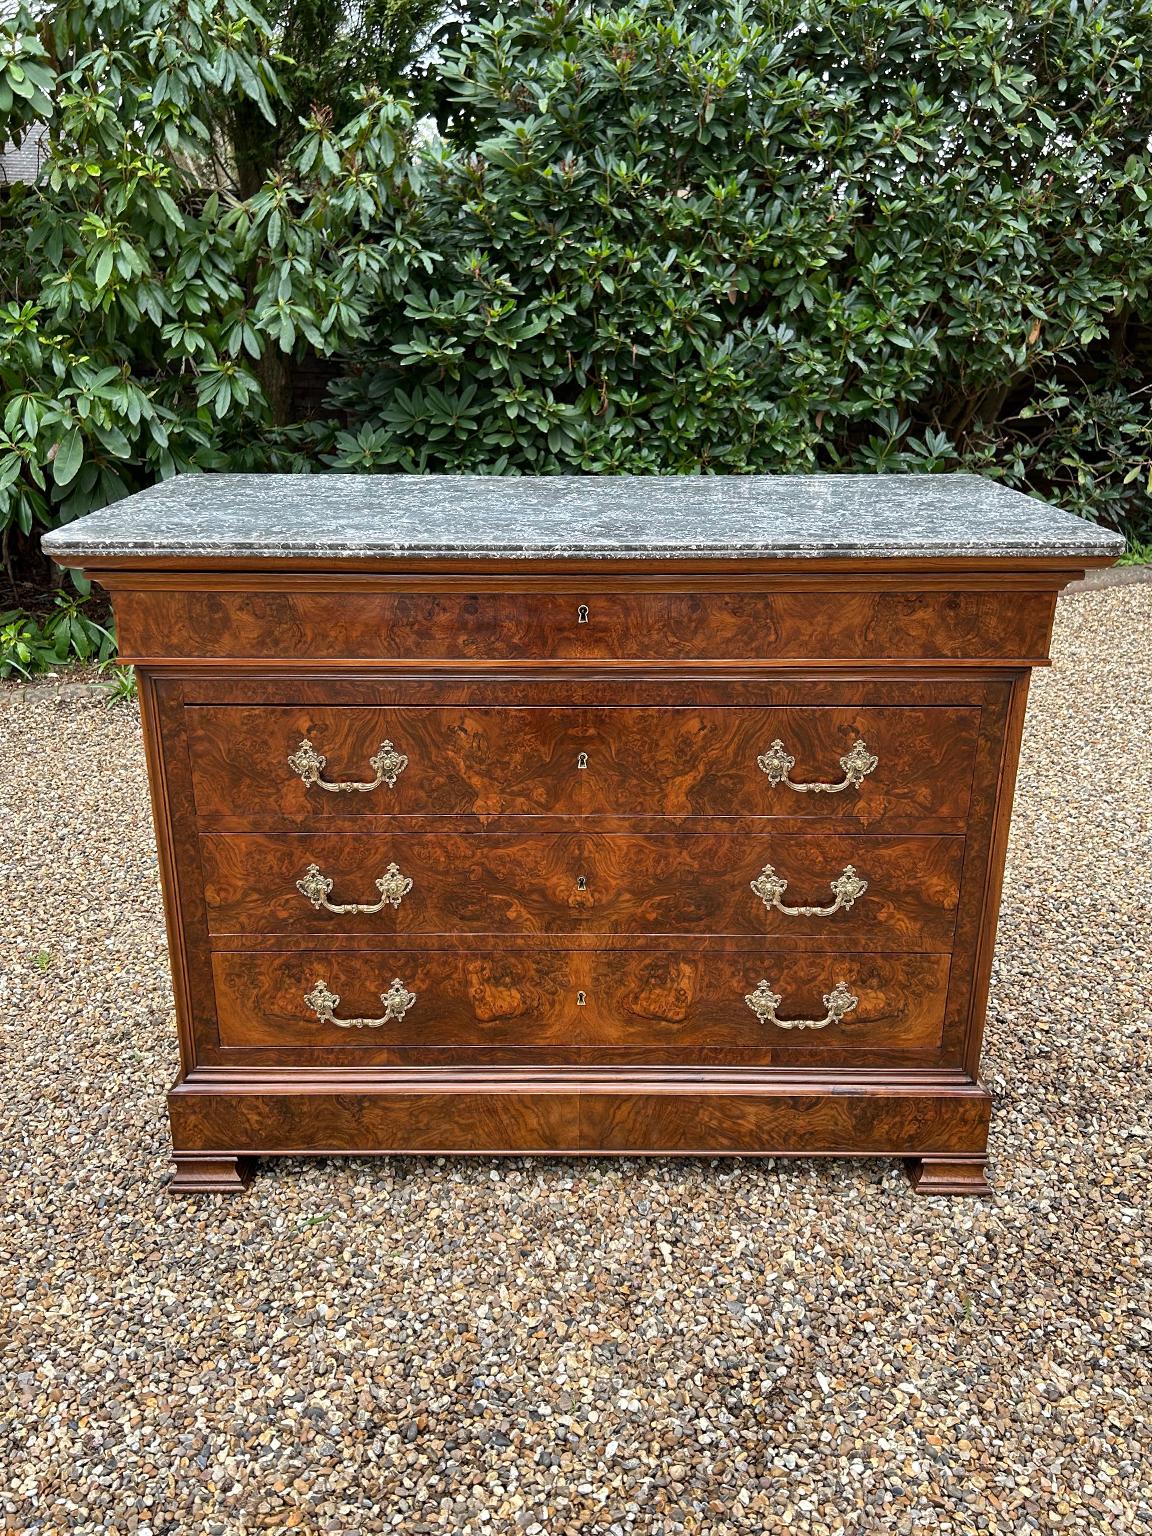 A super quality 19th century French Commode chest of drawers with beautiful figured Burr Walnut throughout, and solid removable Marble top, four drawers and original french brass swan neck handles.

circa: 1860

Dimensions:
Height: 38 inches –